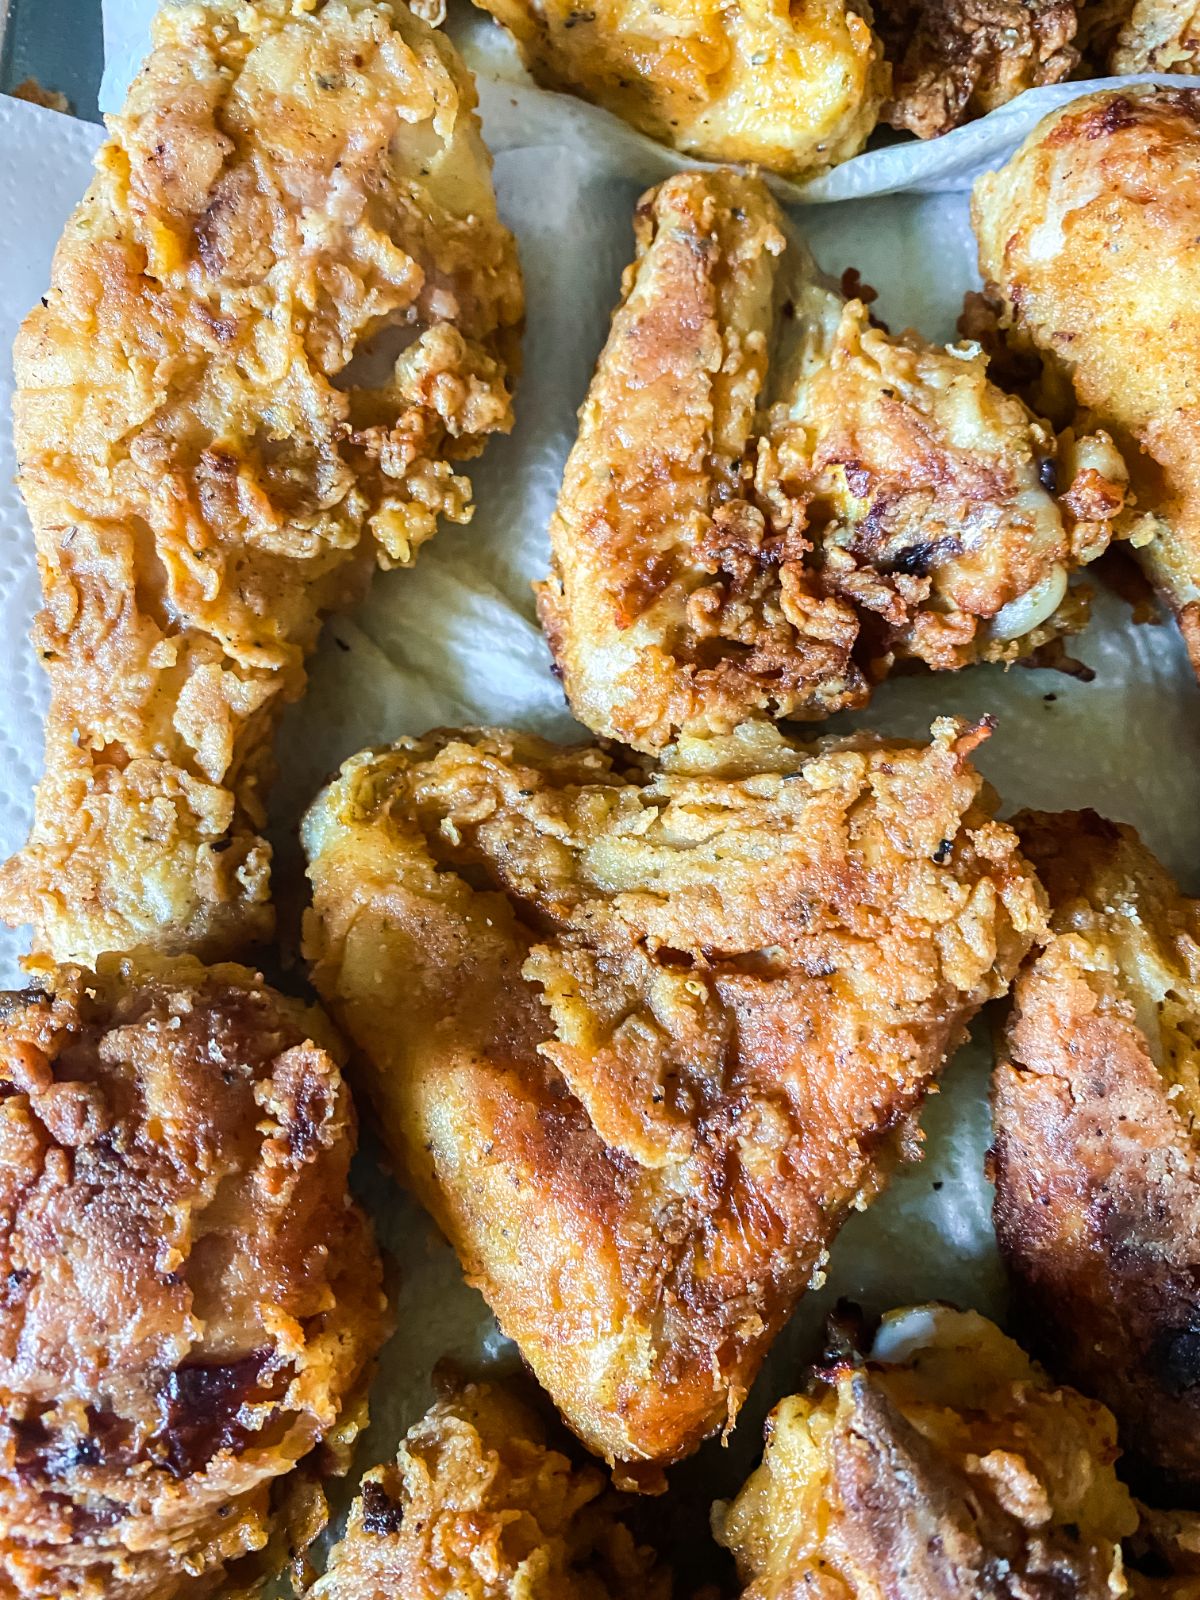 fried chicken on paper towels